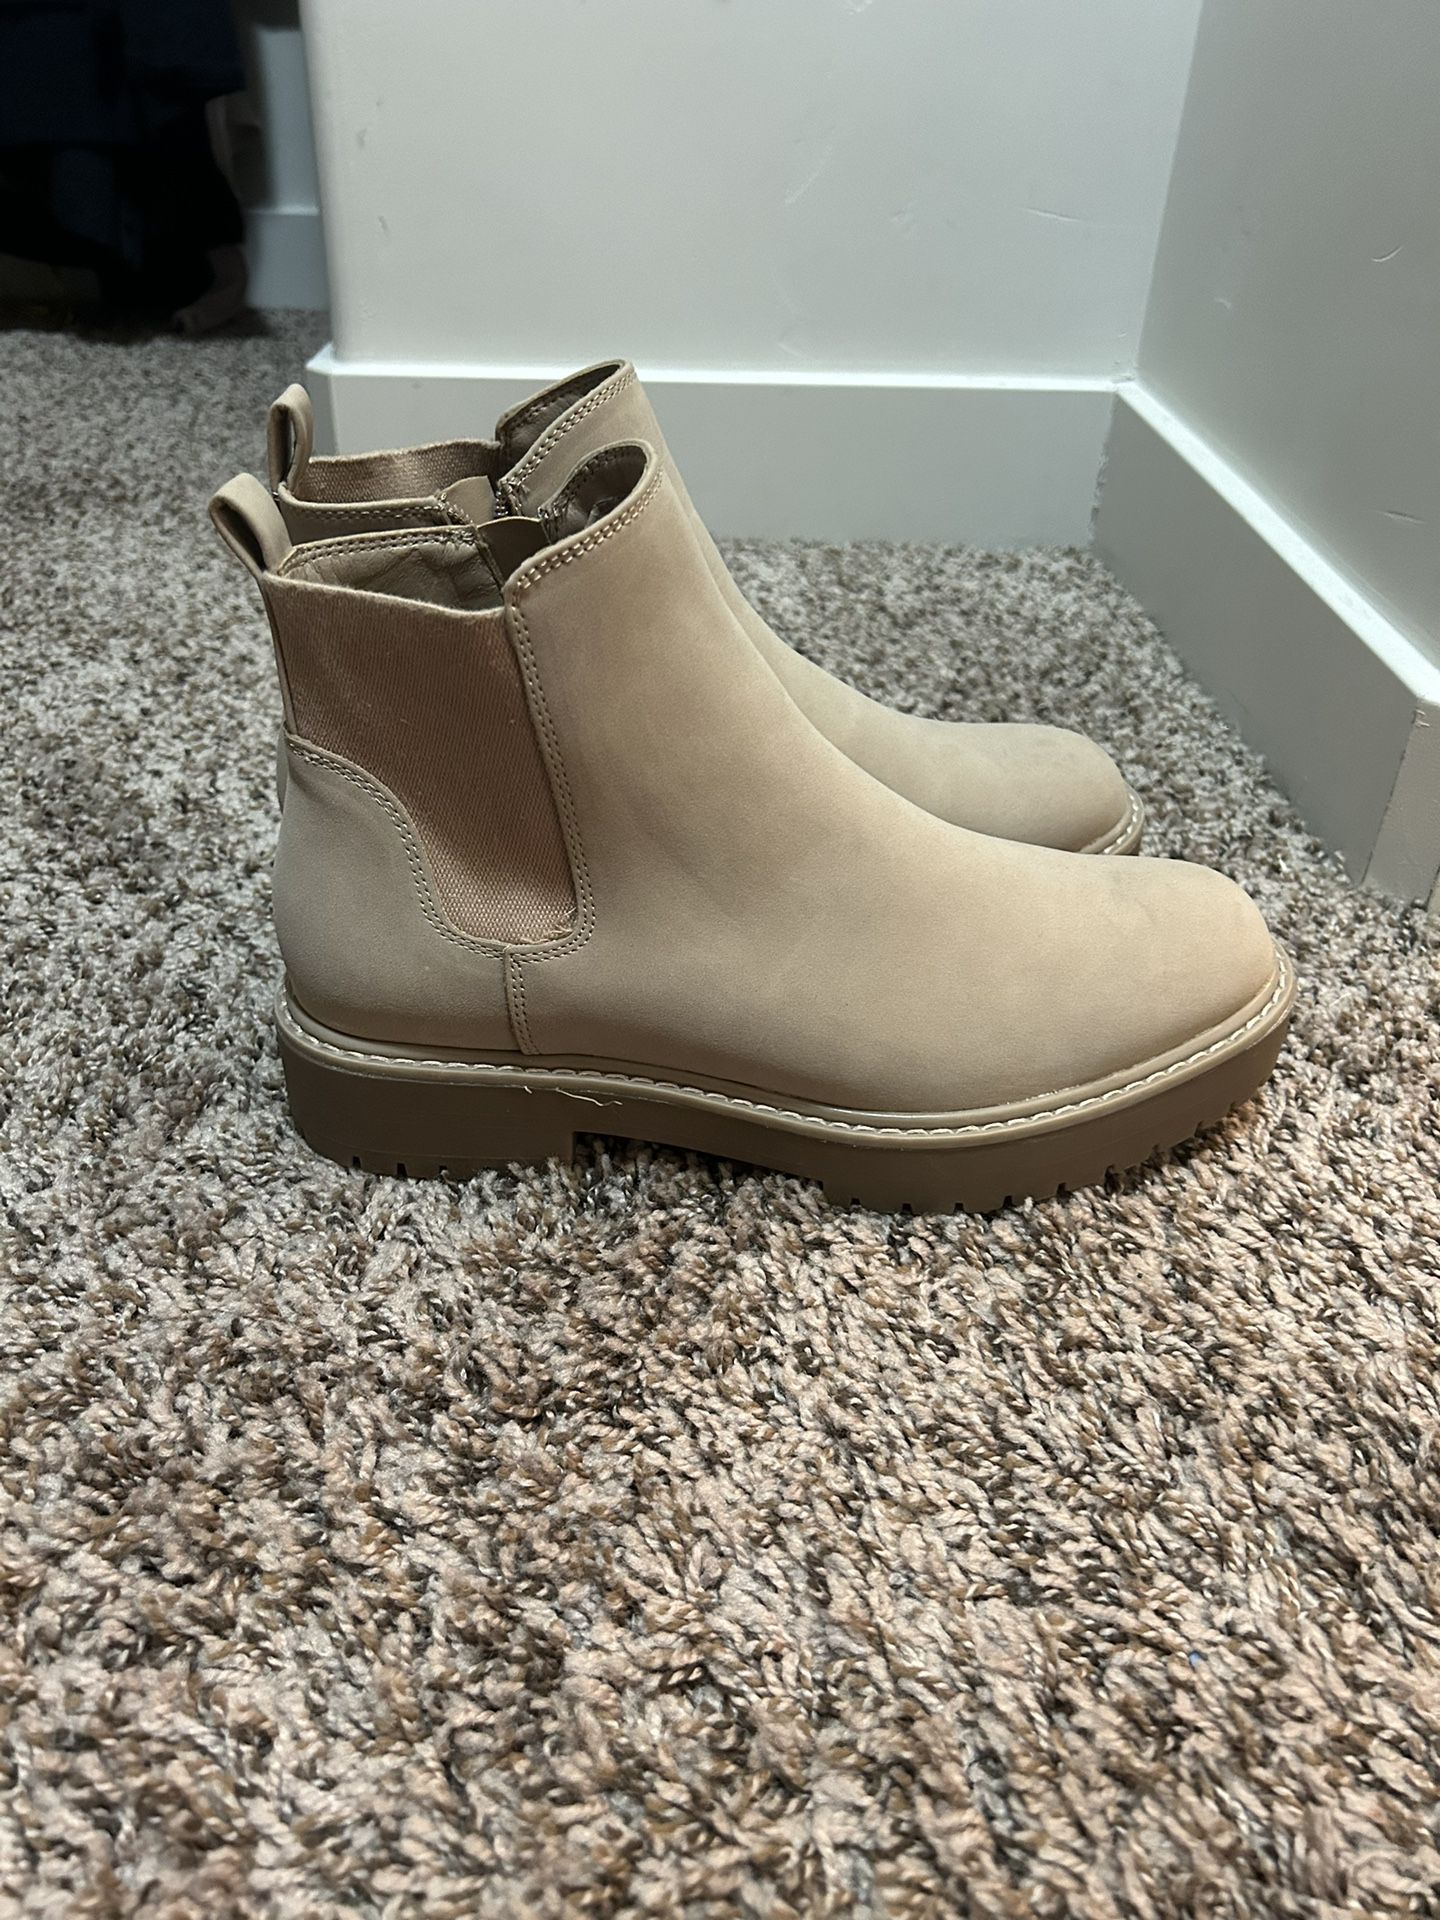 Boots size 10